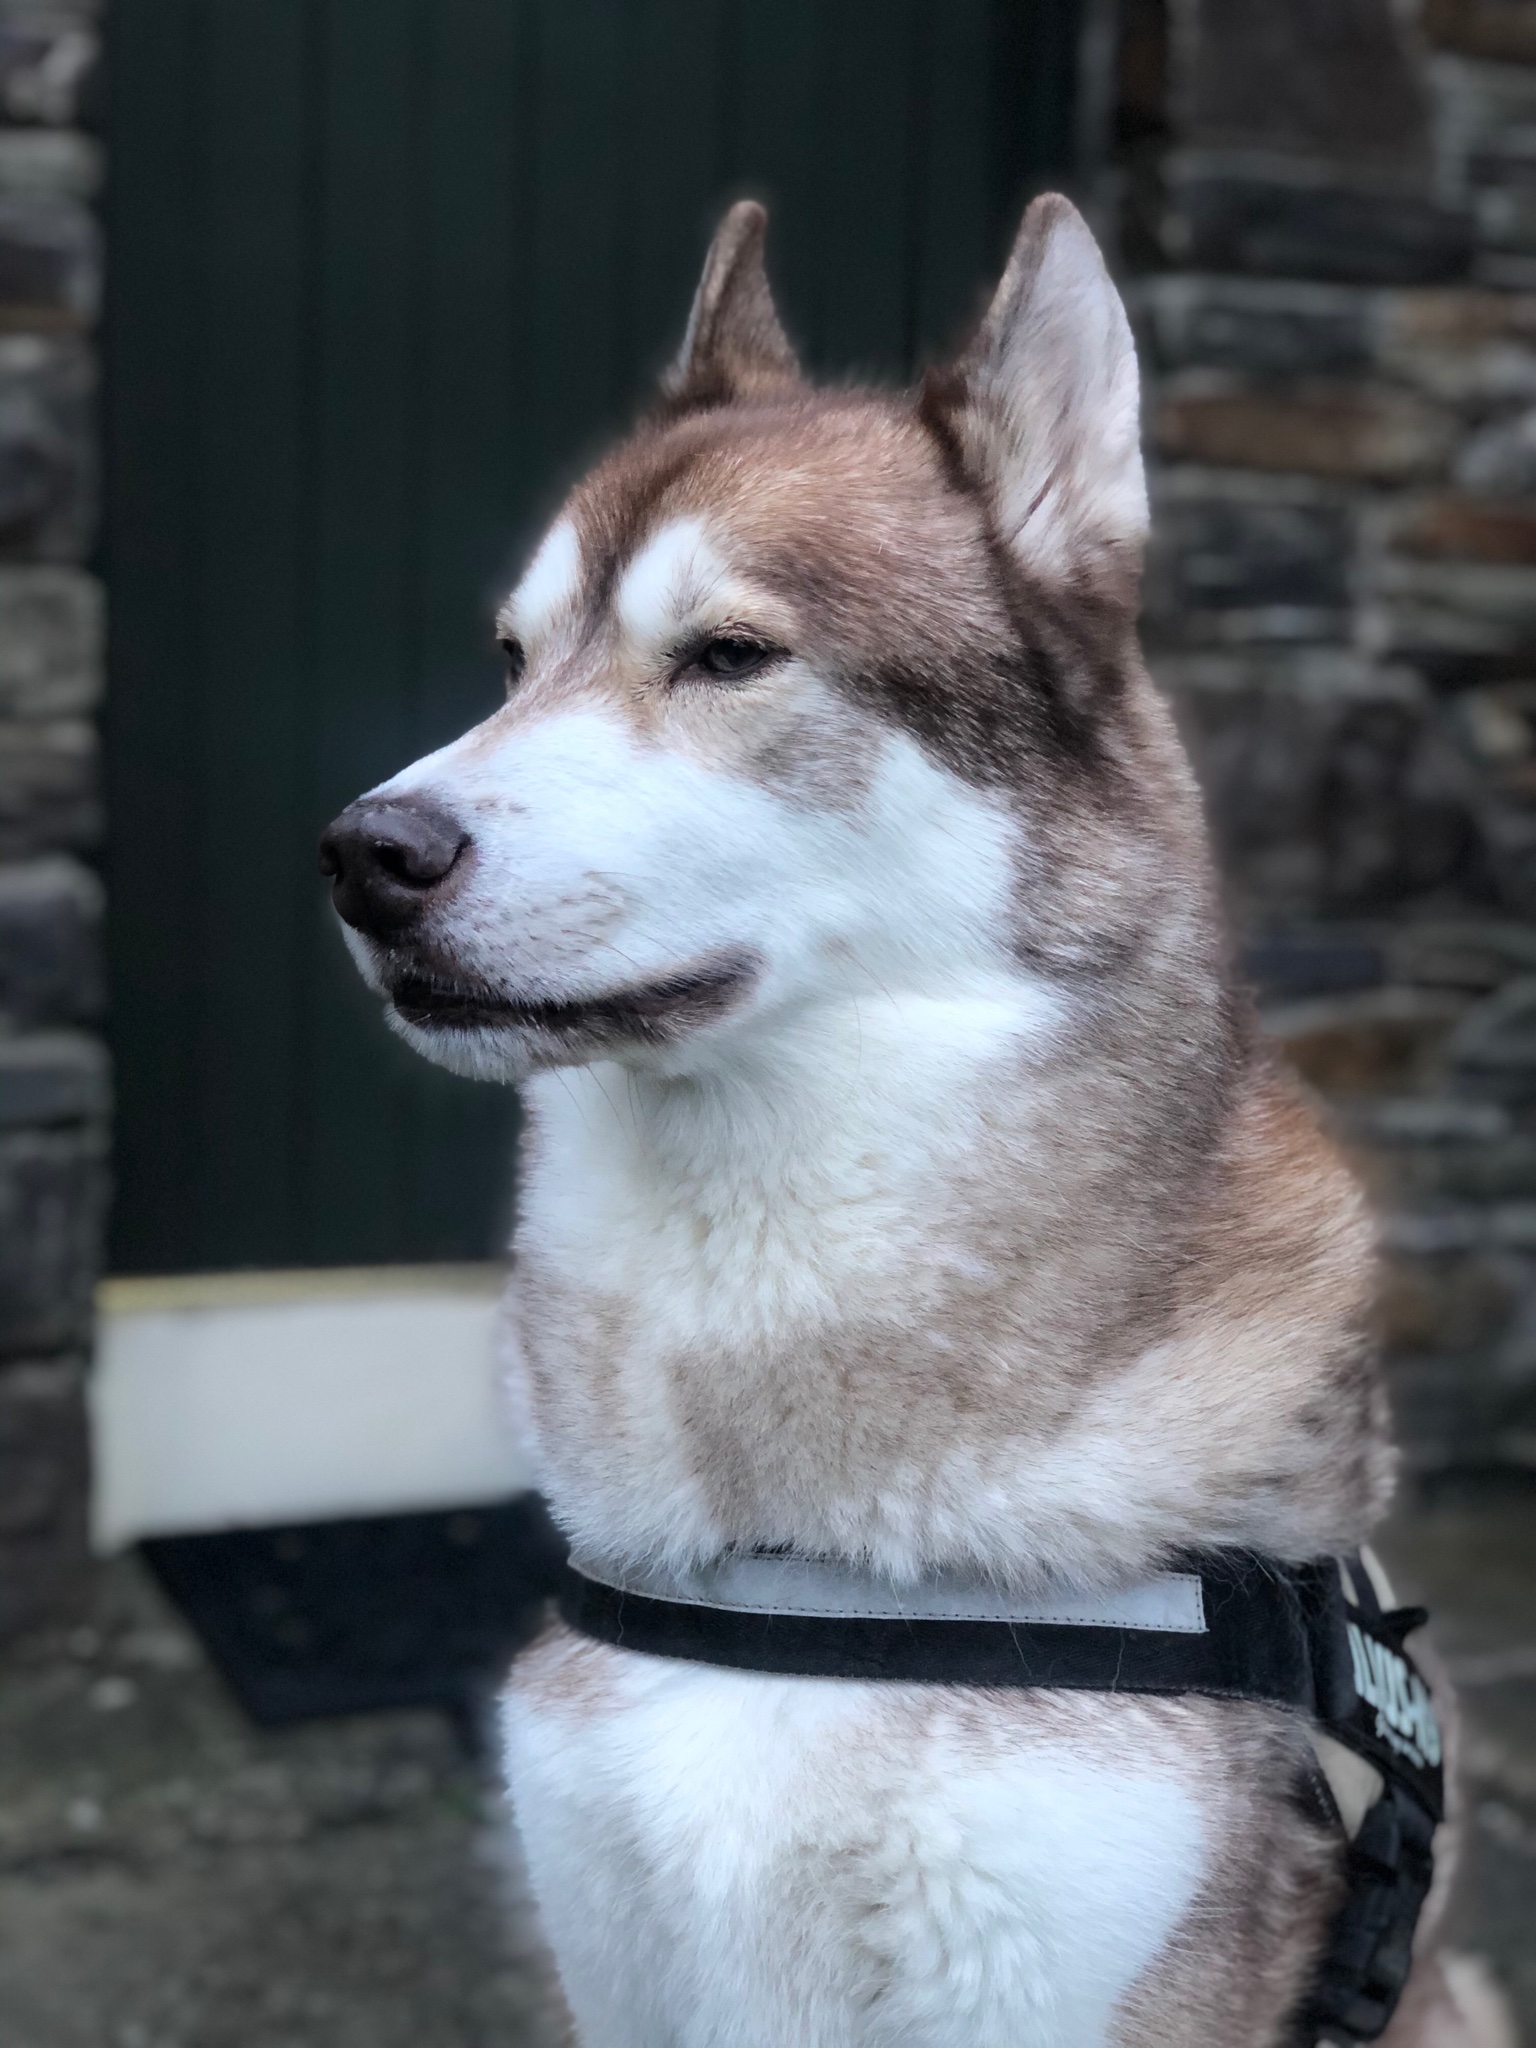 Oskar the huskamute outside the front door with an unimpressed look on his face.